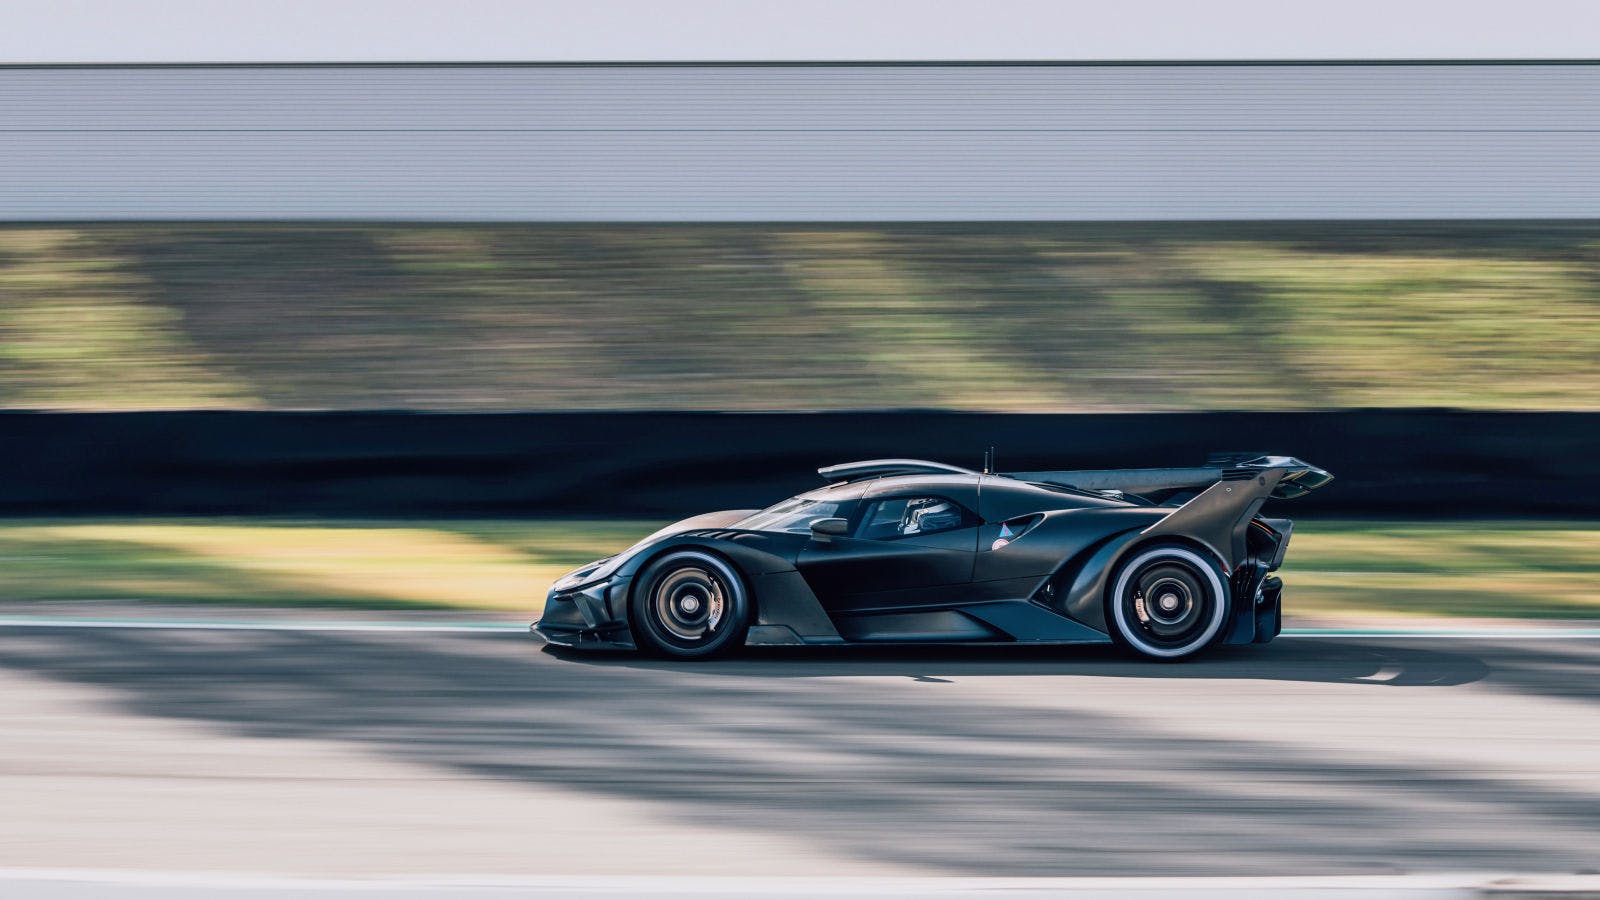 The Bolide takes Bugatti's “form follows performance” philosophy to a new level.